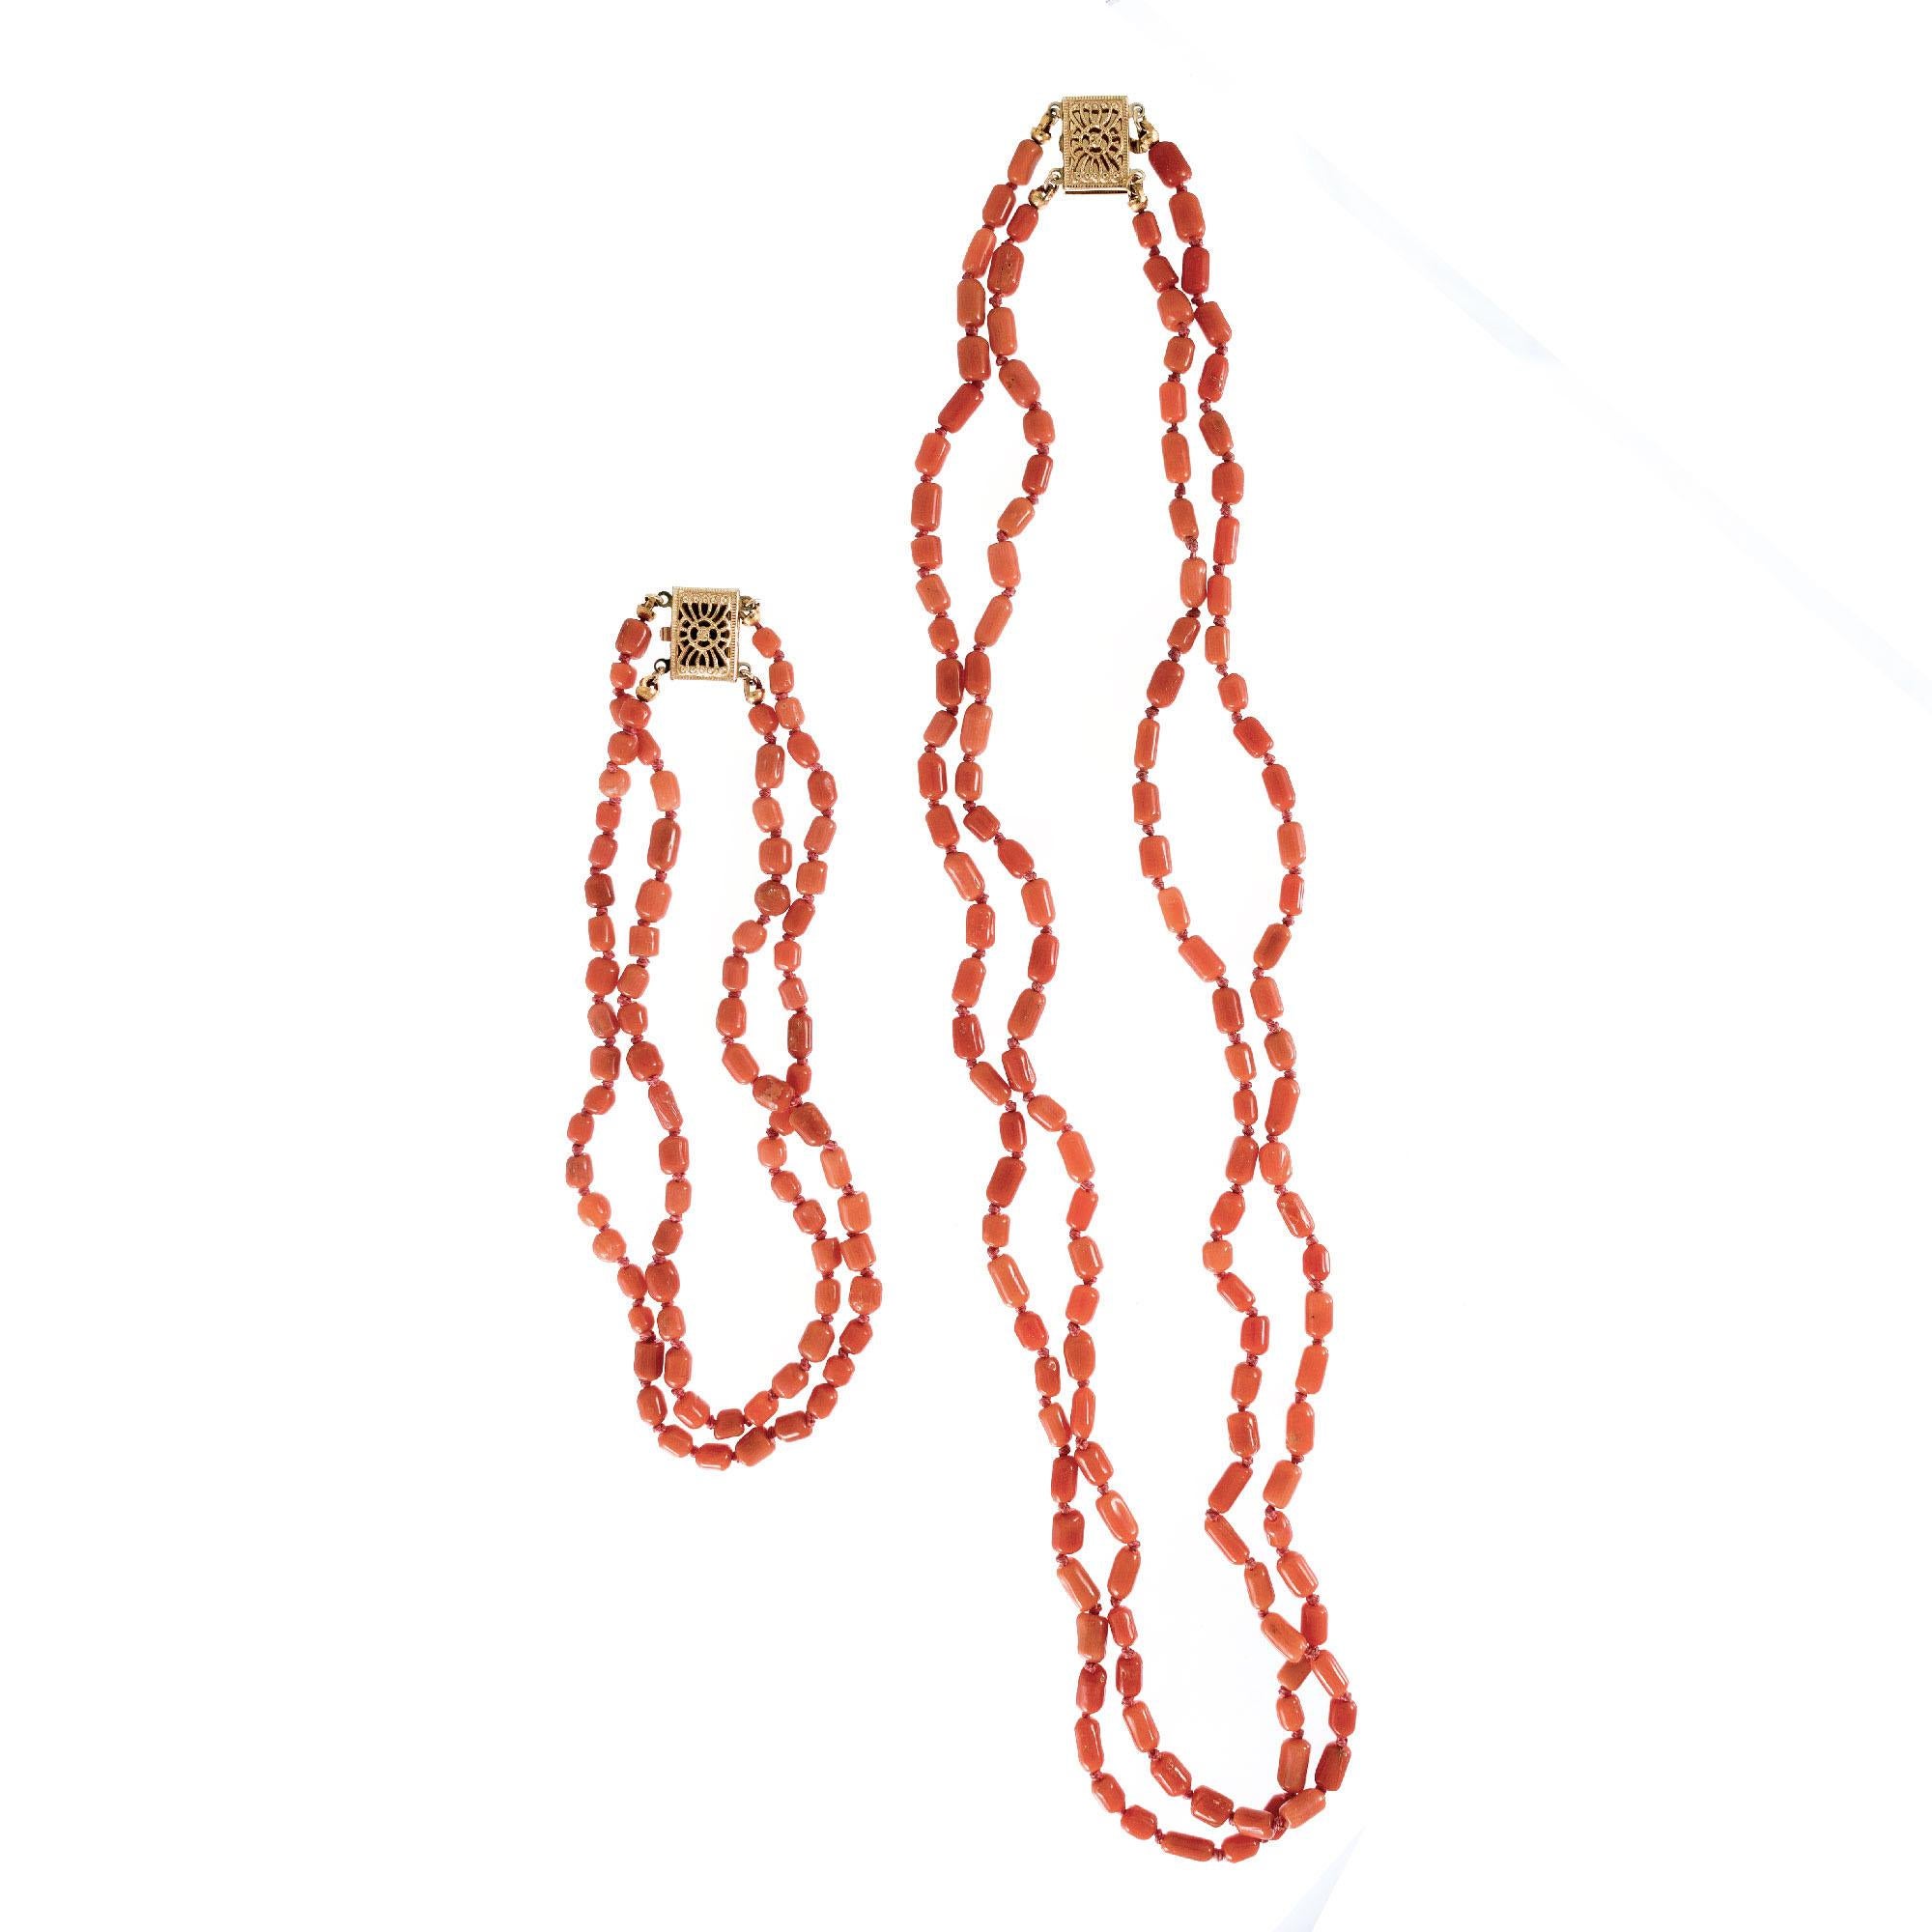 Natural untreated coral GIA certified 16.5 matching two strand necklace with a 9 Inch extender to make a 25.5 inch long necklace or worn as a bracelet. 

Necklace:
137 Reddish orange coral beads GIA certificate # 1182037981
Bracelet: 
81 Reddish